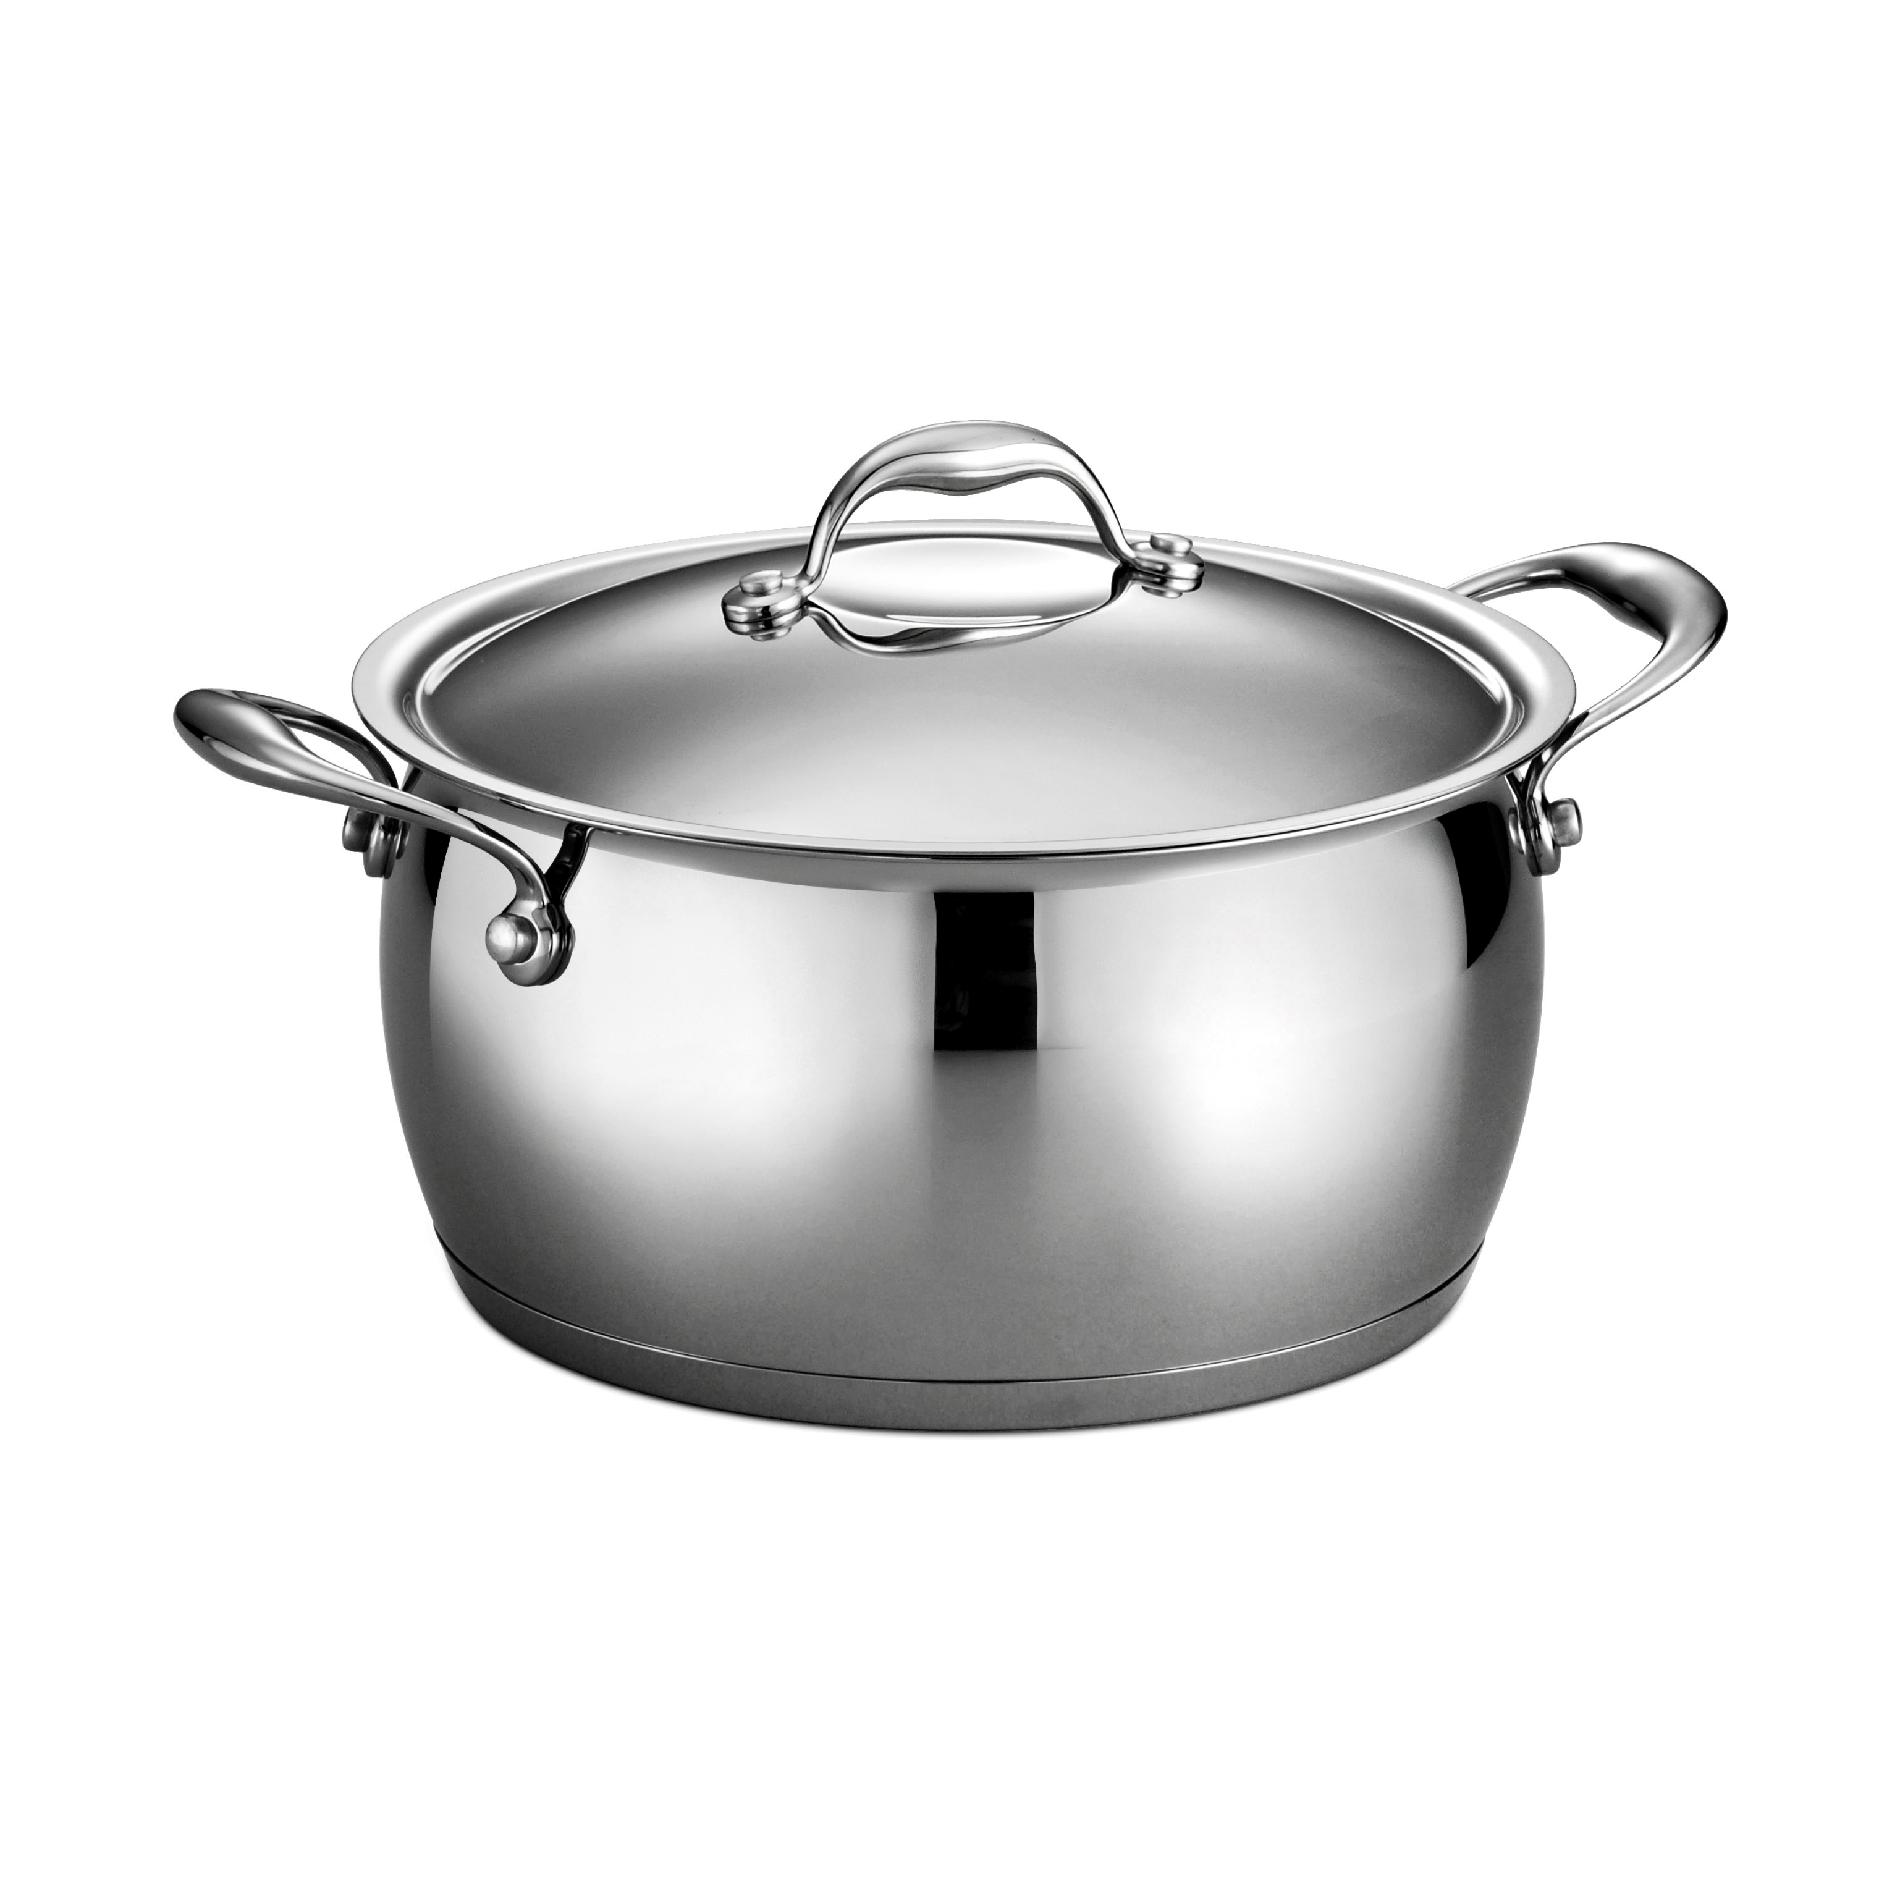 0016017023628 - GOURMET DOMUS 18/10 STAINLESS STEEL 5.5 QT COVERED STOCK POT